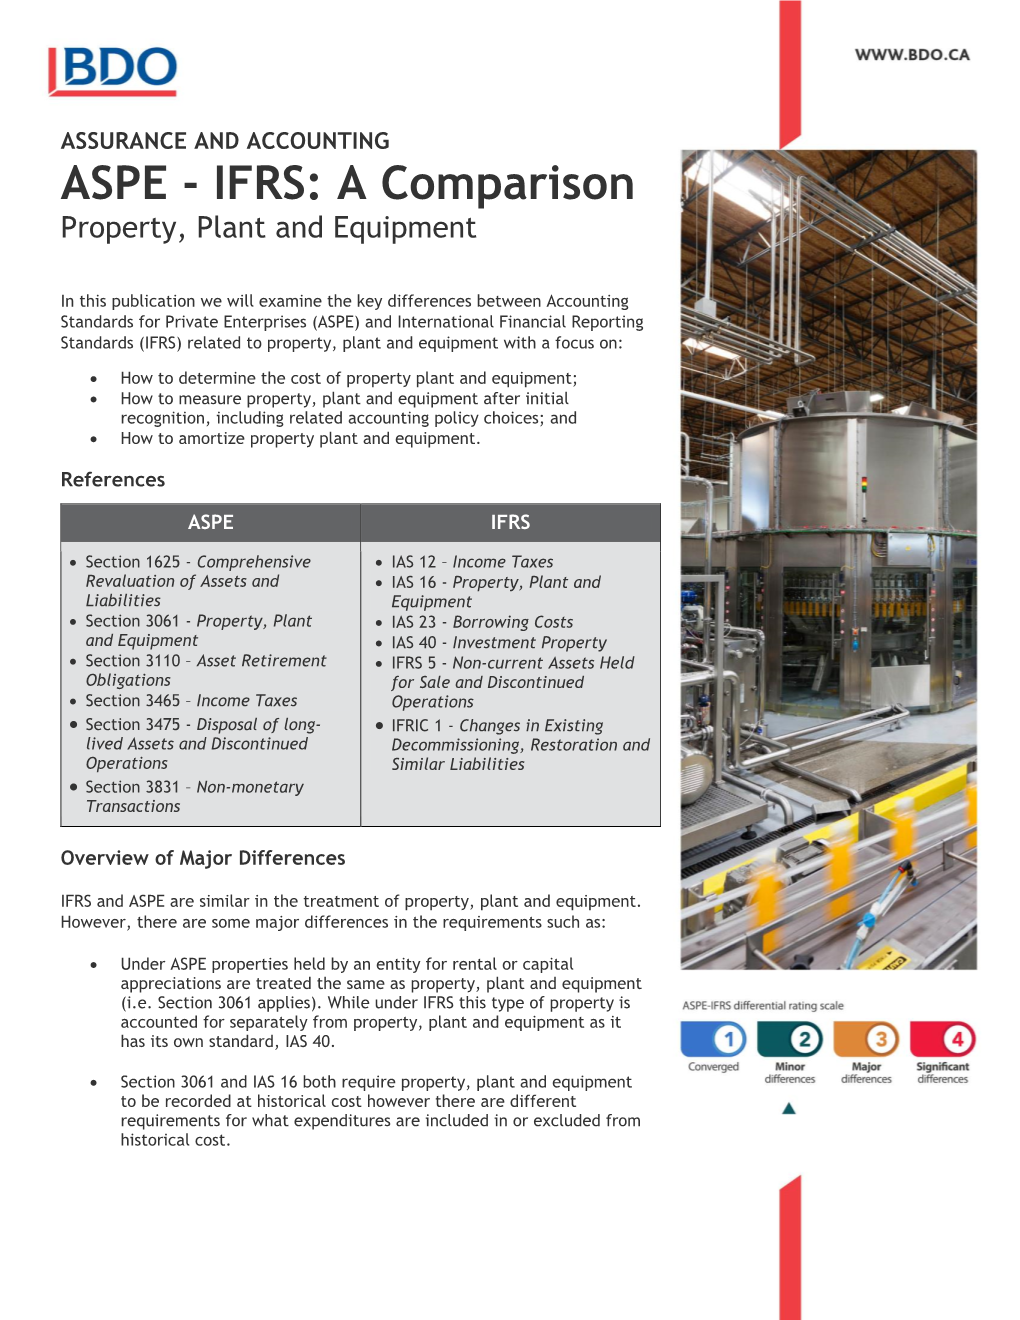 ASPE - IFRS: a Comparison Property, Plant and Equipment